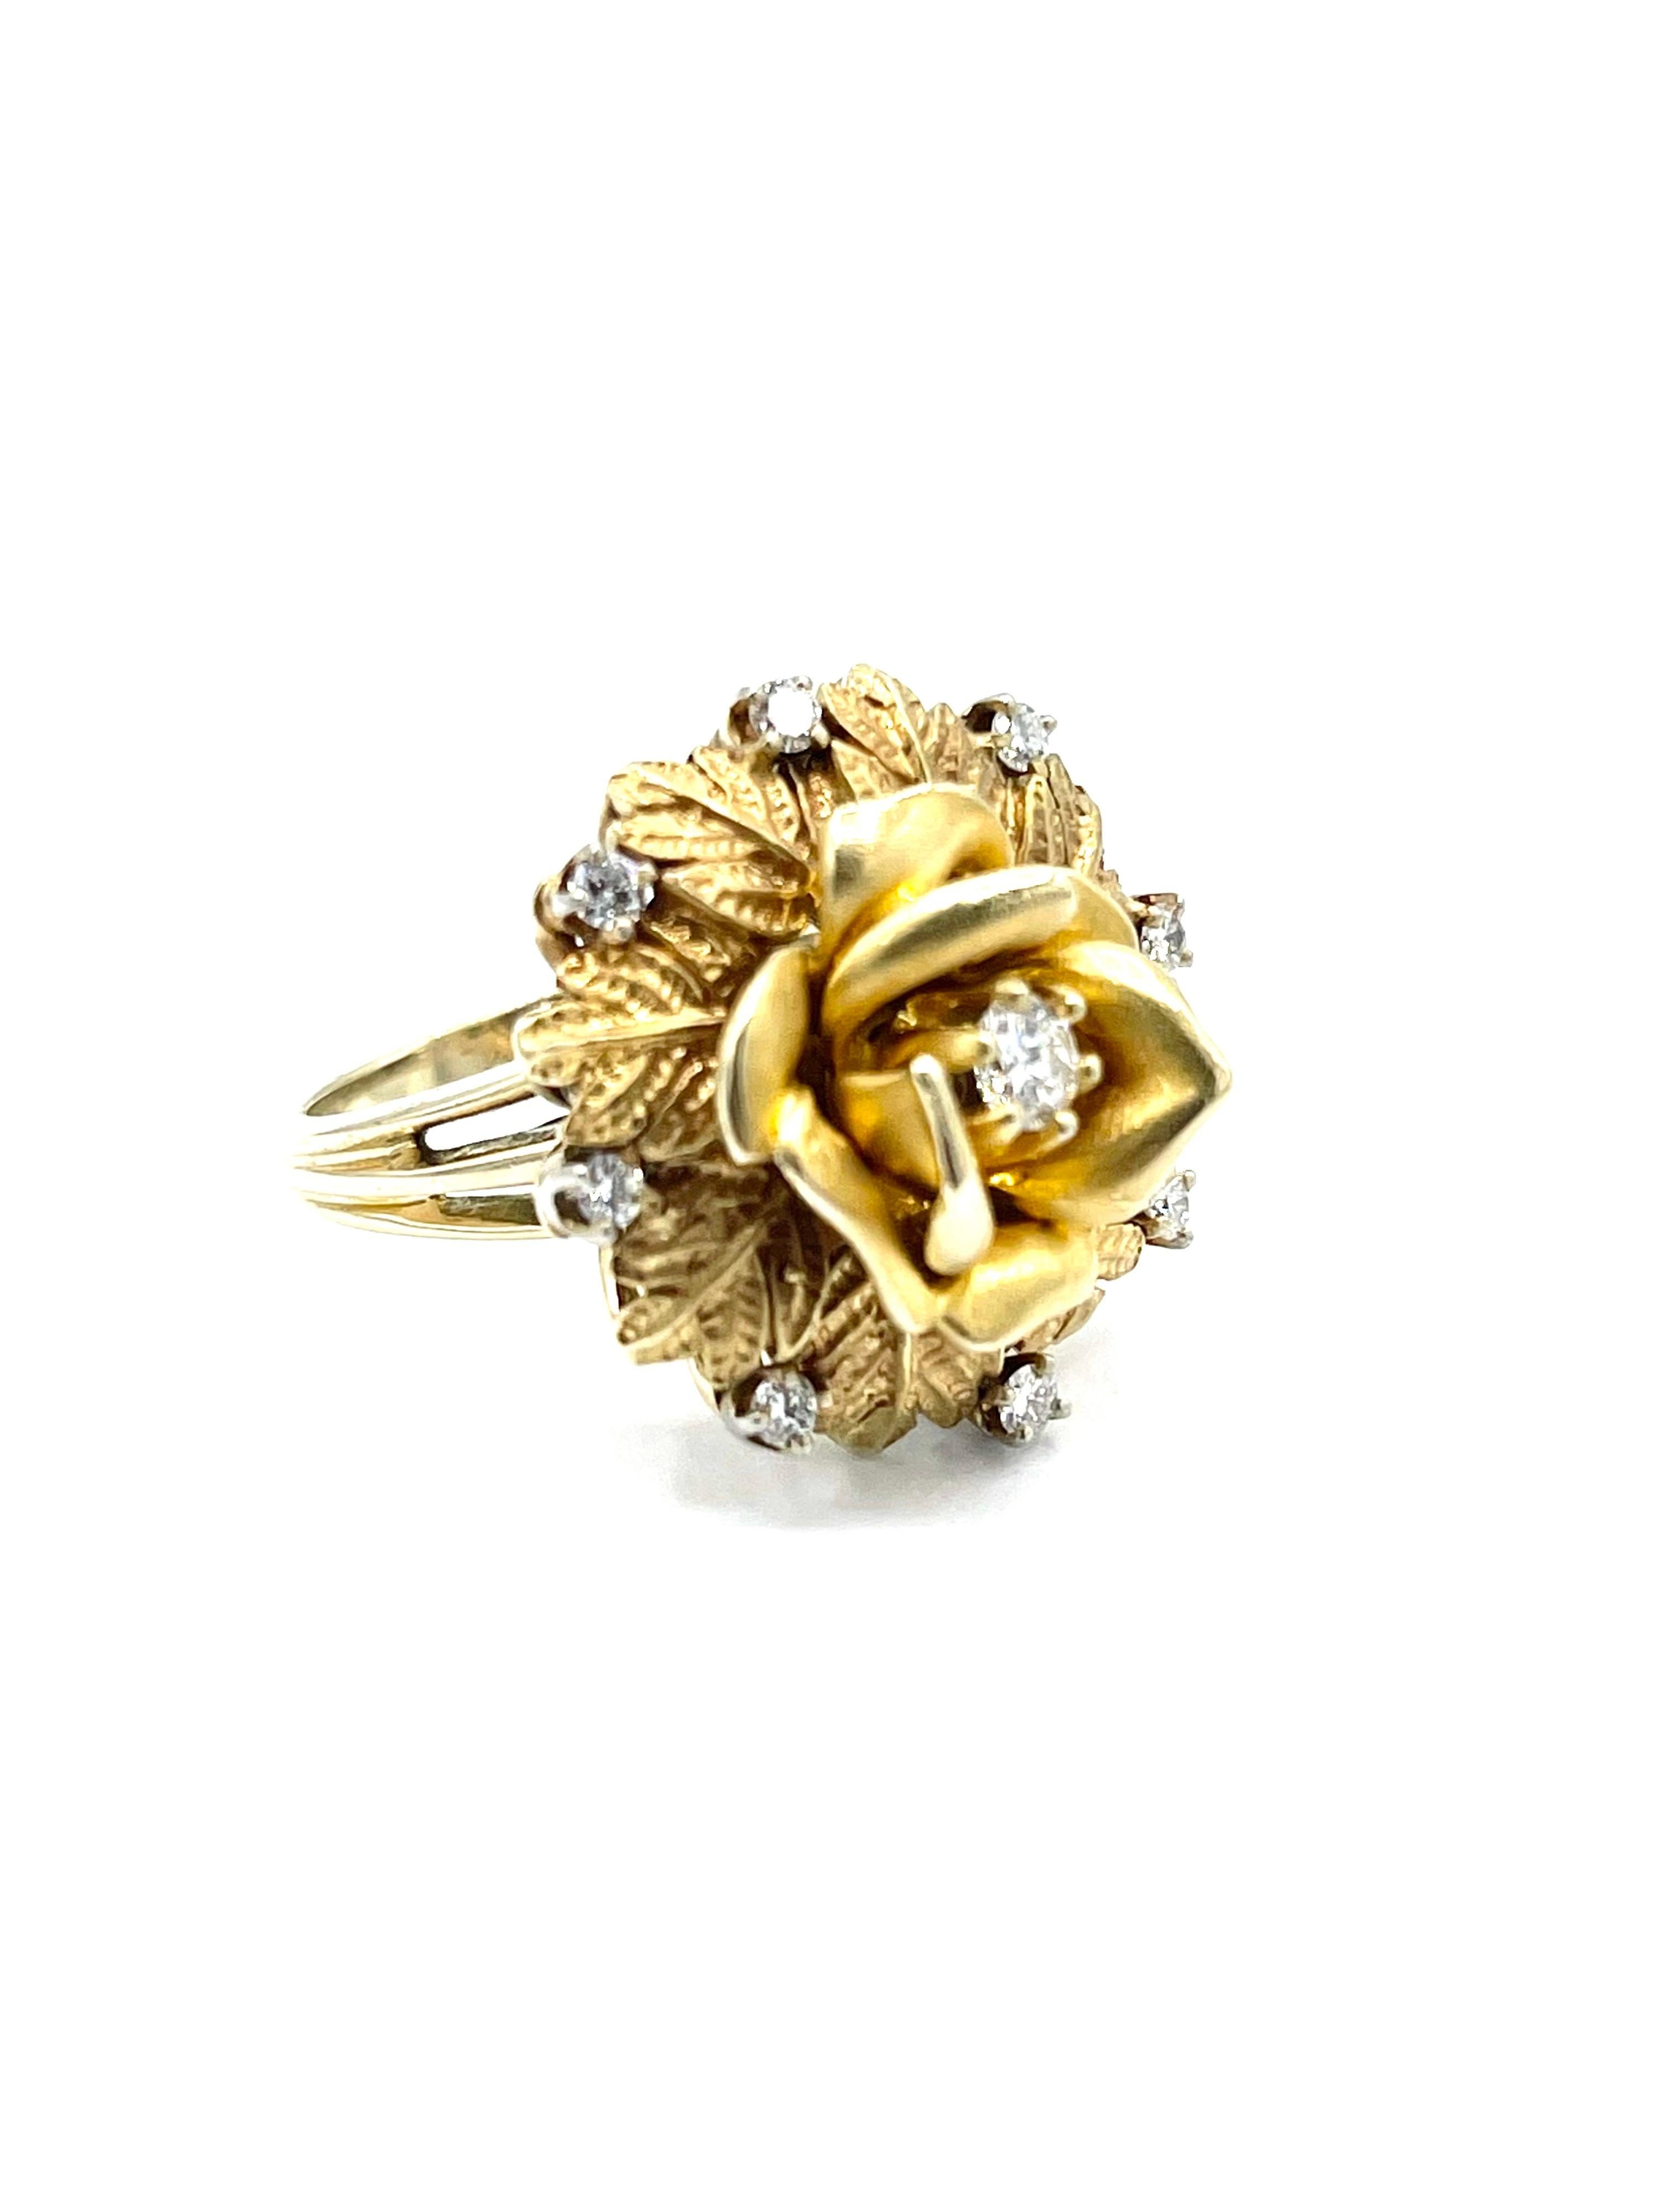 Retro 0.36 Carat Round Brilliant Diamond and Textured 18K Gold Flower Cocktail Ring For Sale